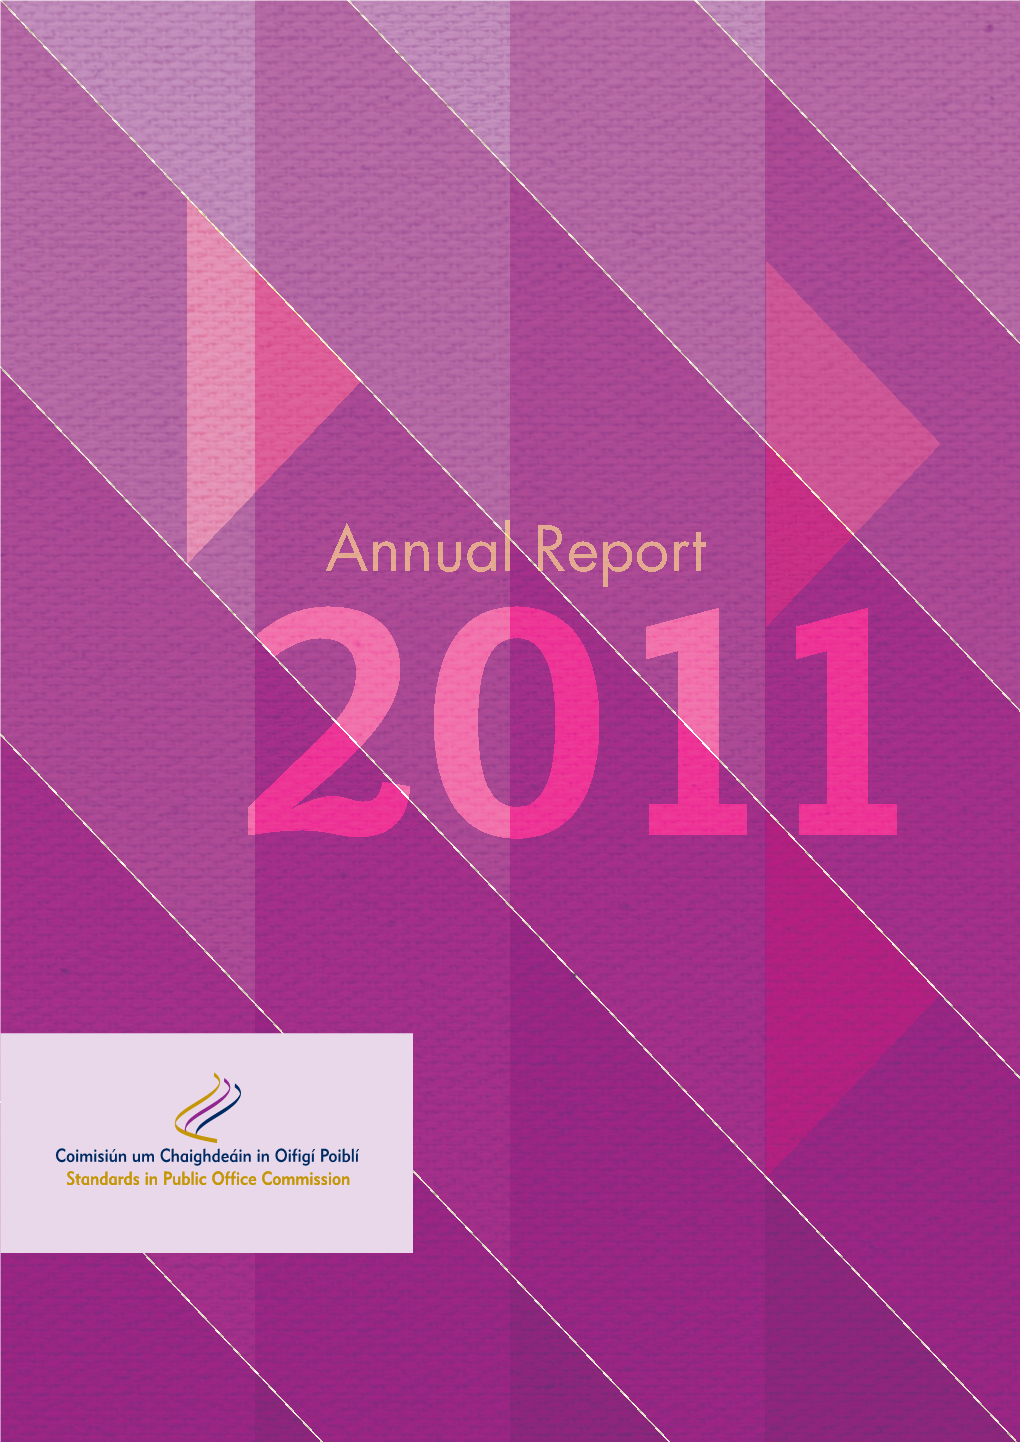 Standards in Public Office Commission Annual Report 2011